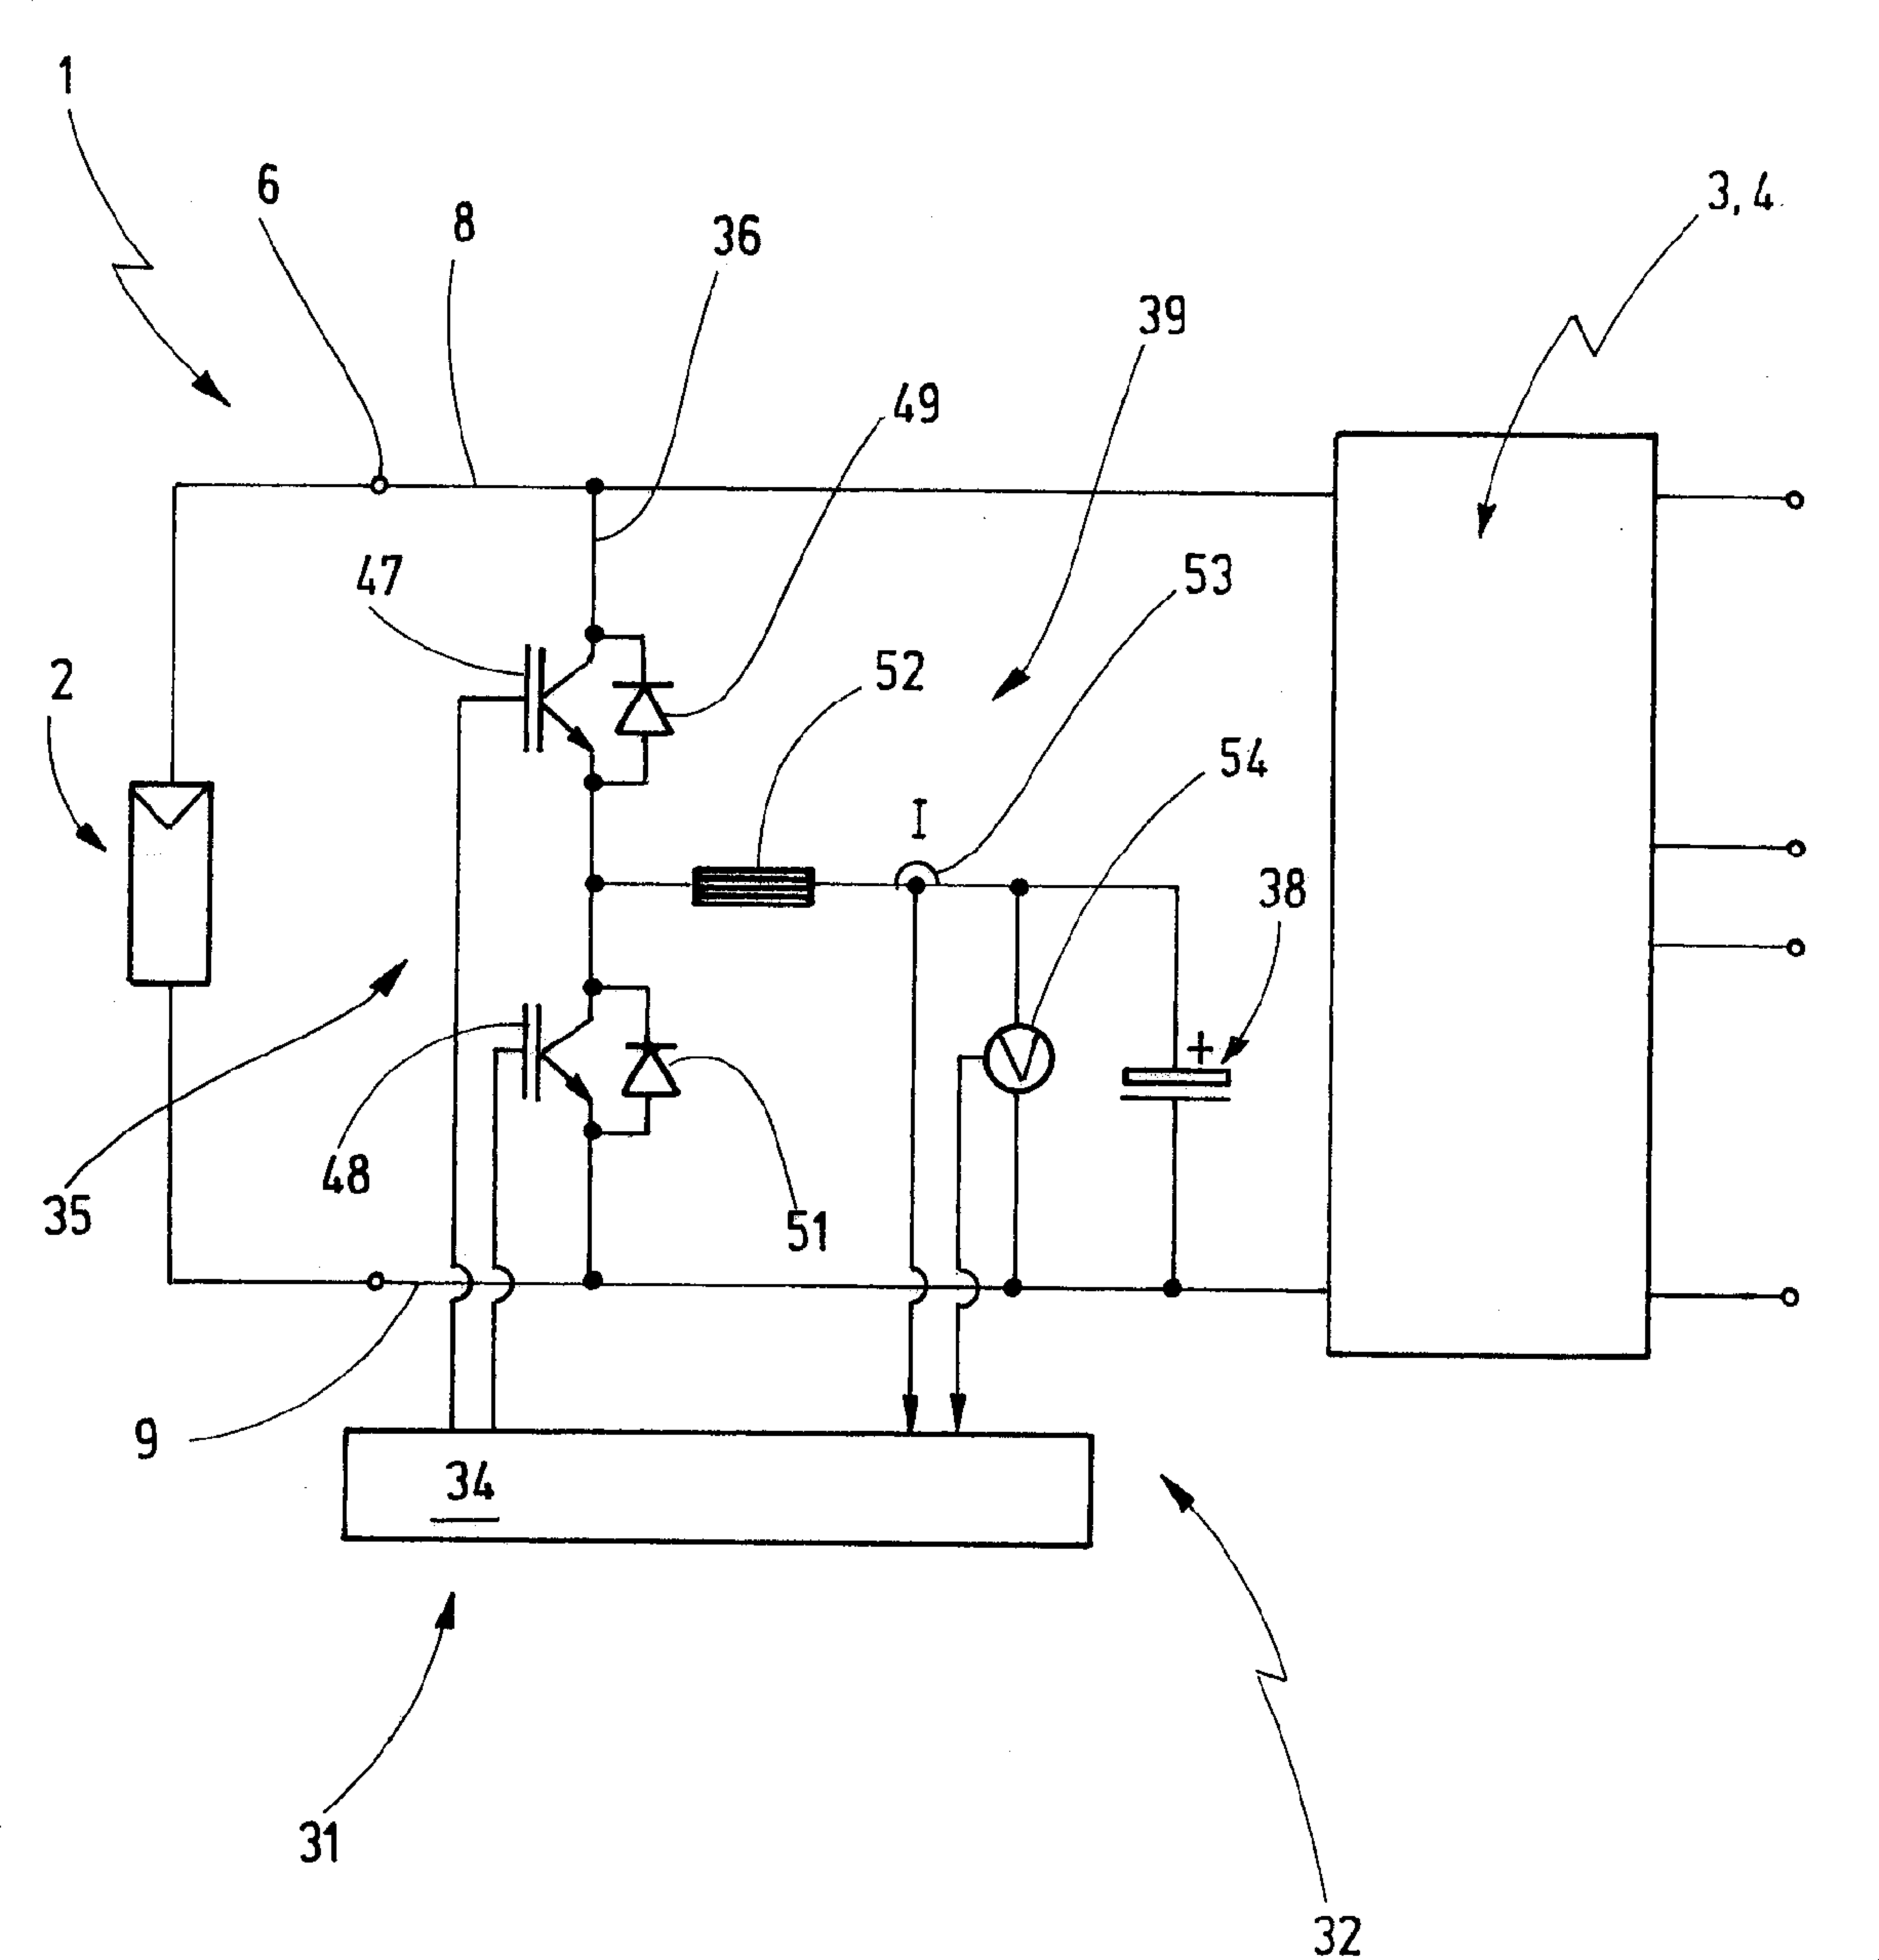 Solar inverter for an extended insolation value range and operating method